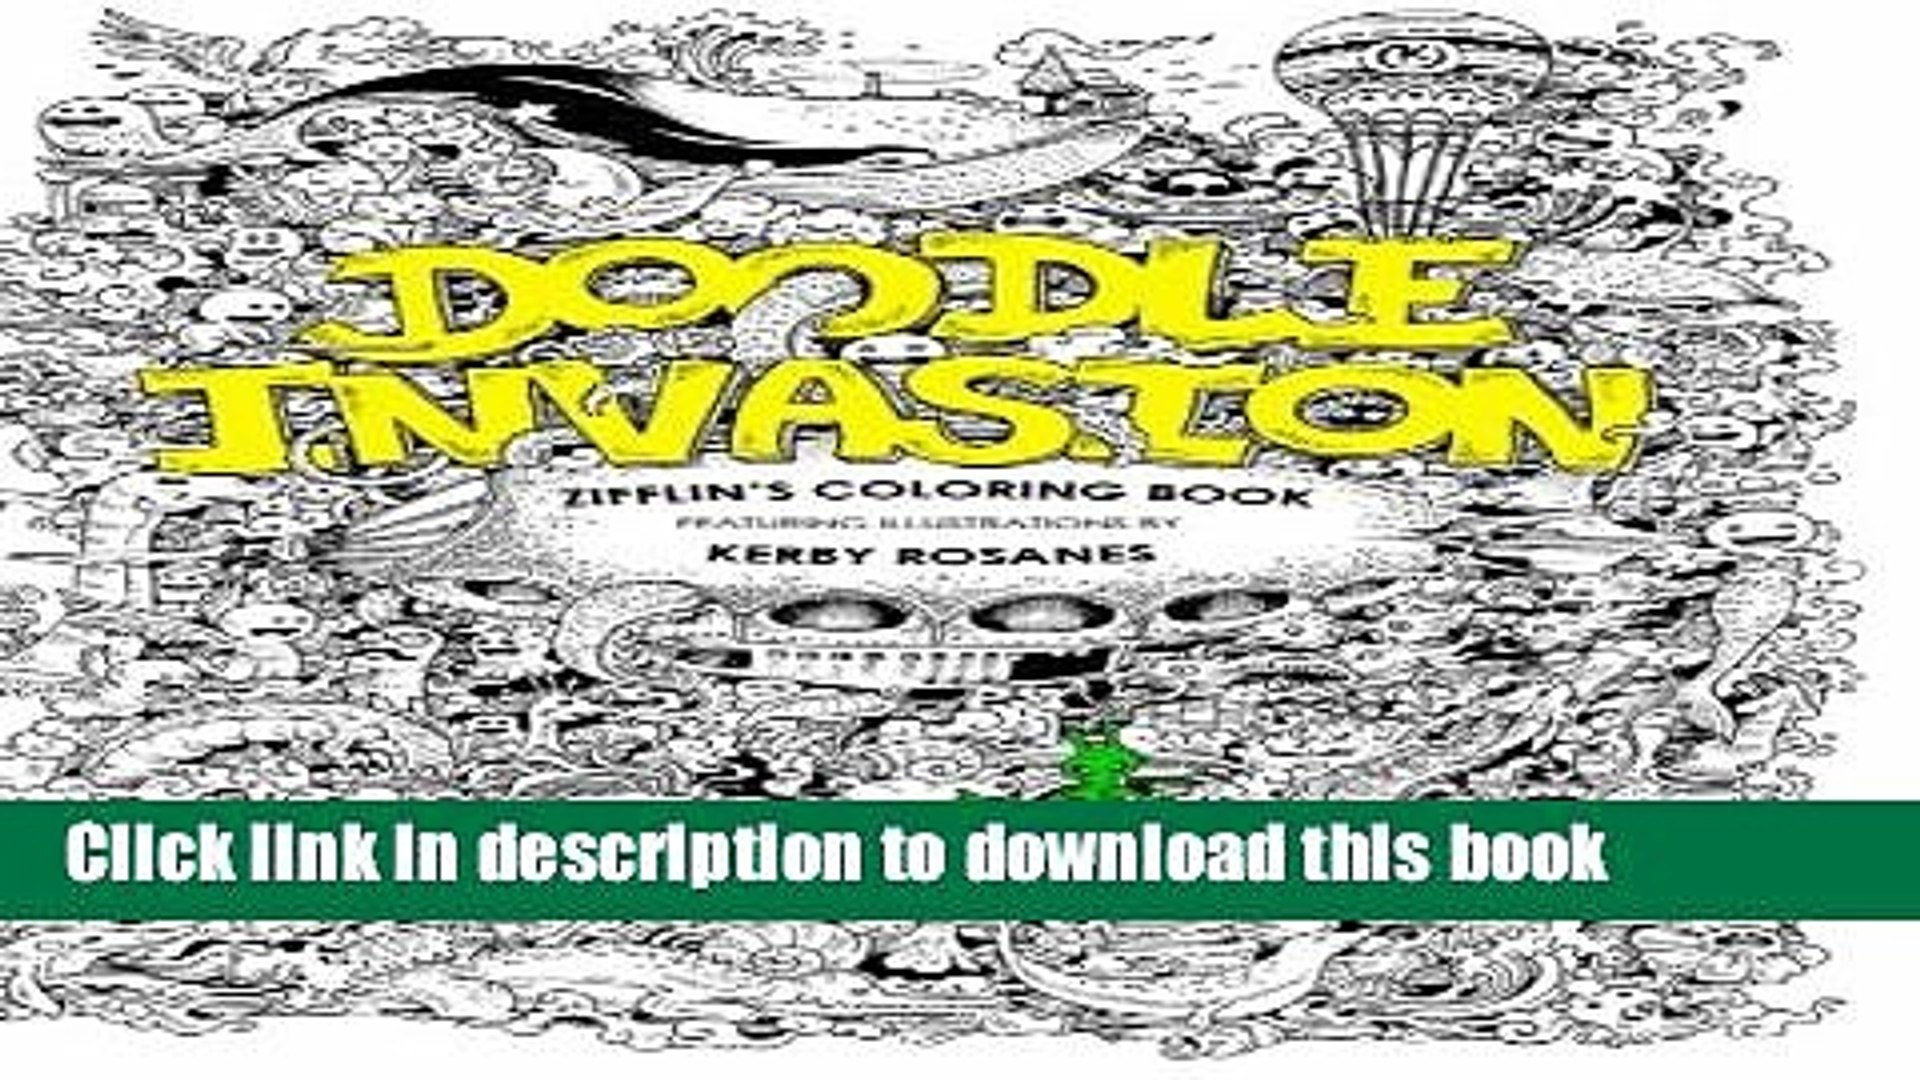 Download Download Doodle Invasion Zifflin S Coloring Book Volume 1 Paperback Collection Video Dailymotion